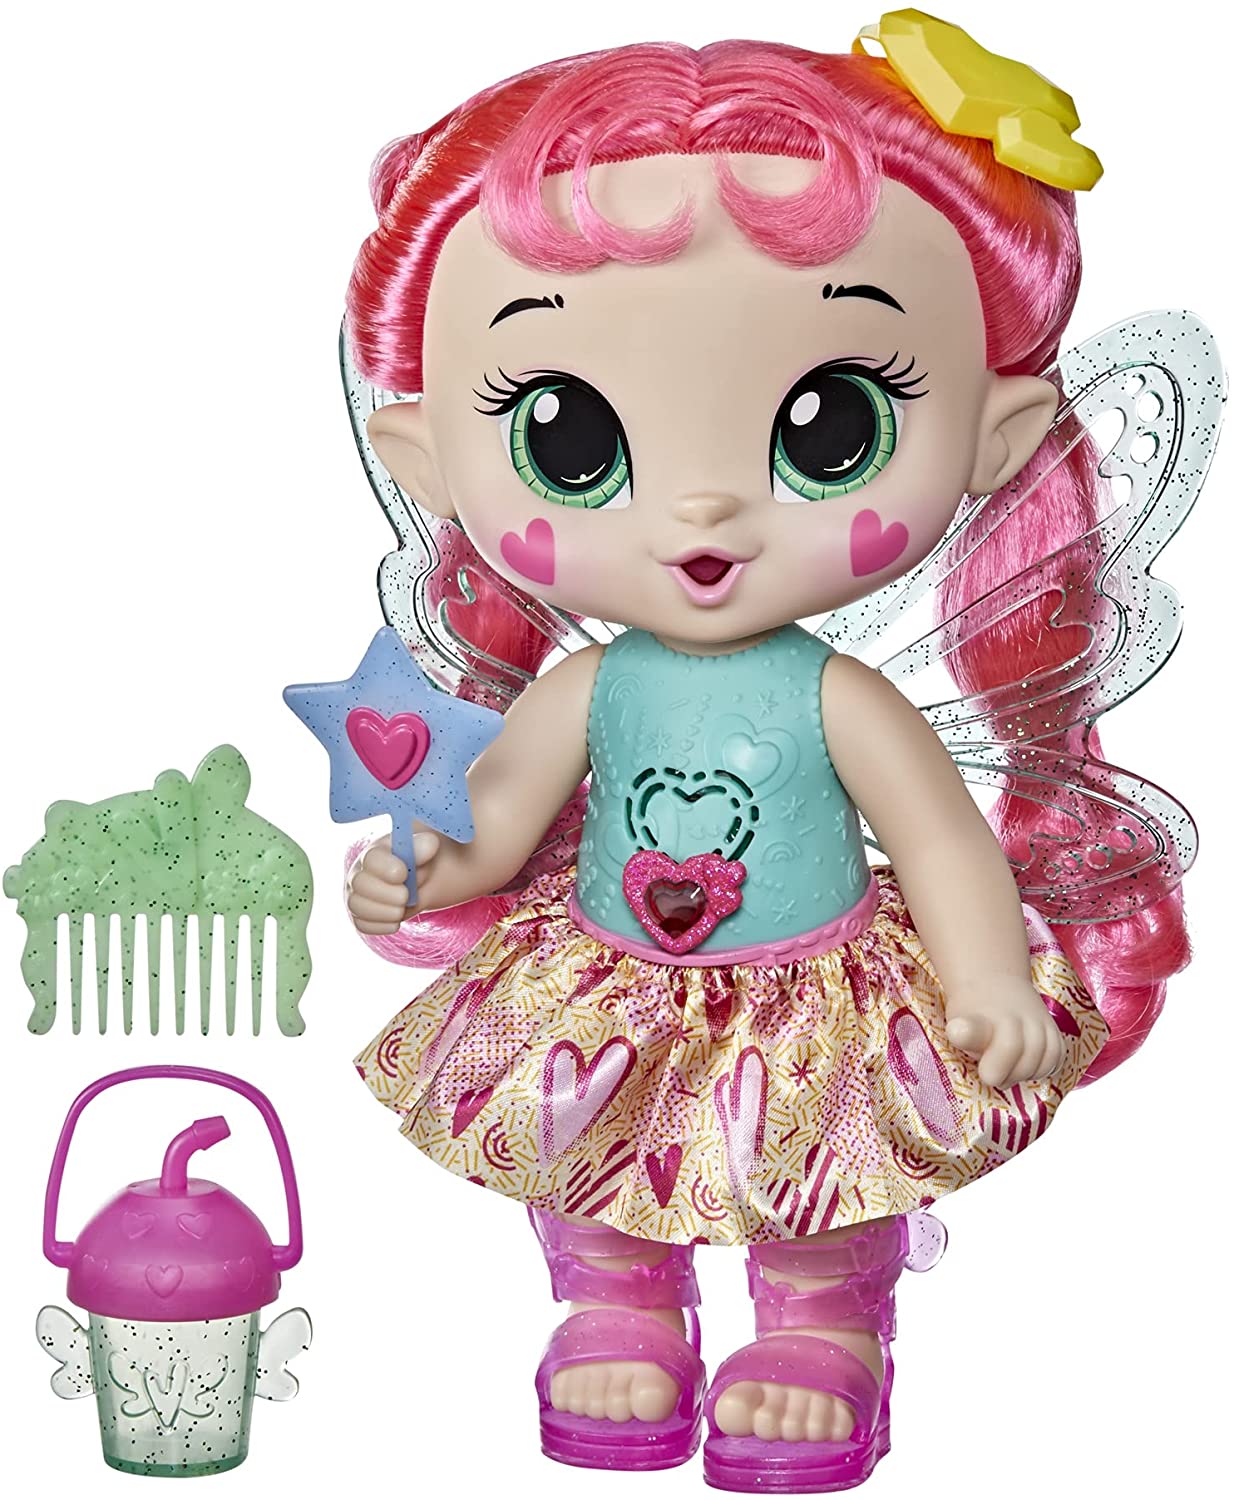 Hasbro - Baby Alive Glo Pixies Sammie Shimmer